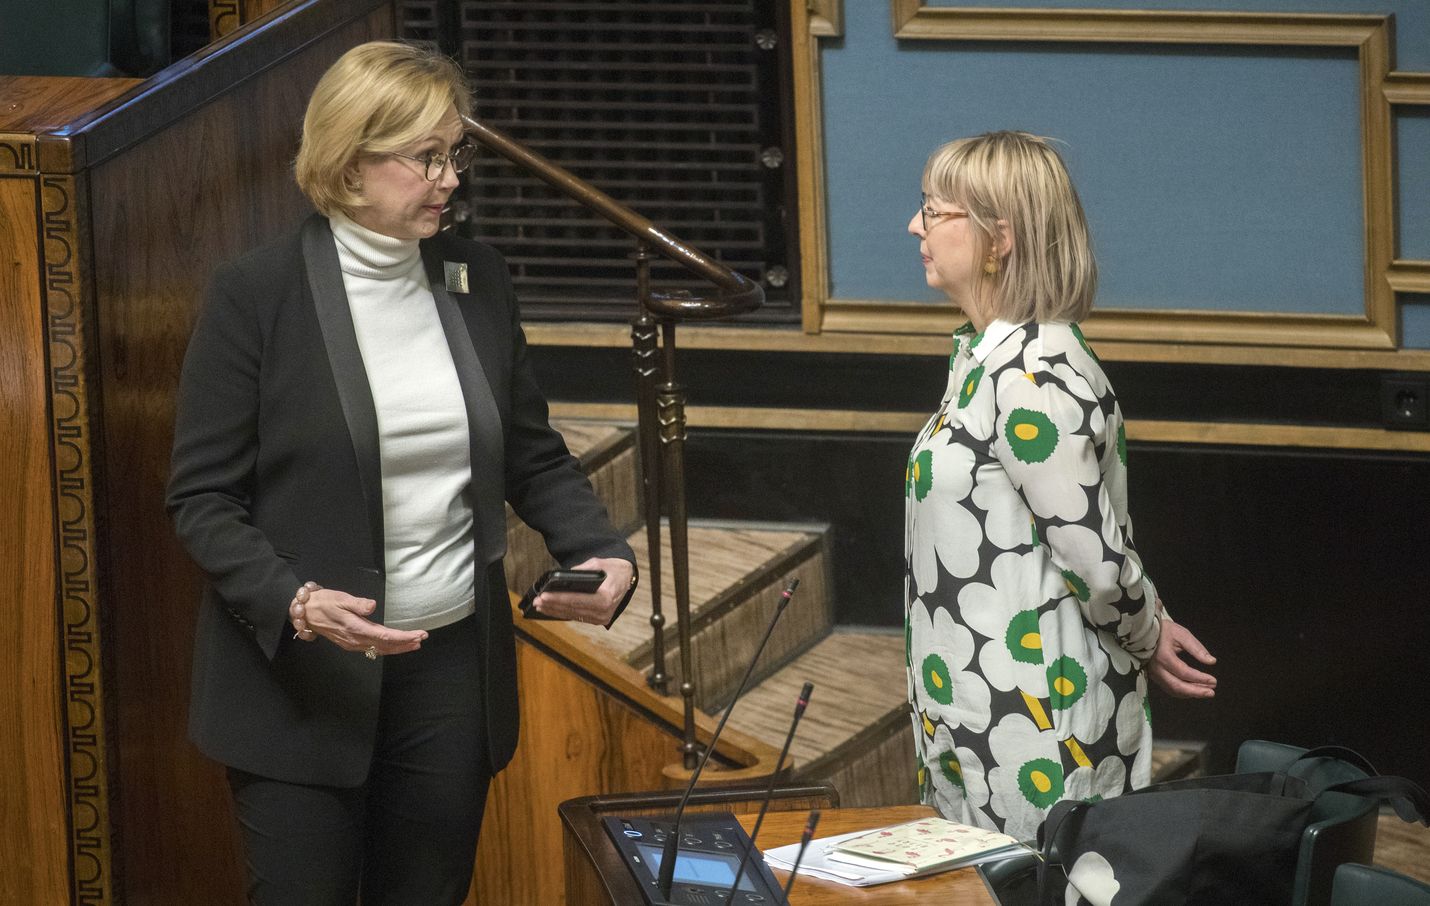 Minister of Labour Tuula Haatainen and Minister of Social Affairs and Health Aino-Kaisa Pekonen and might have come into contact on Tuesday with someone suspected of having coronavirus.